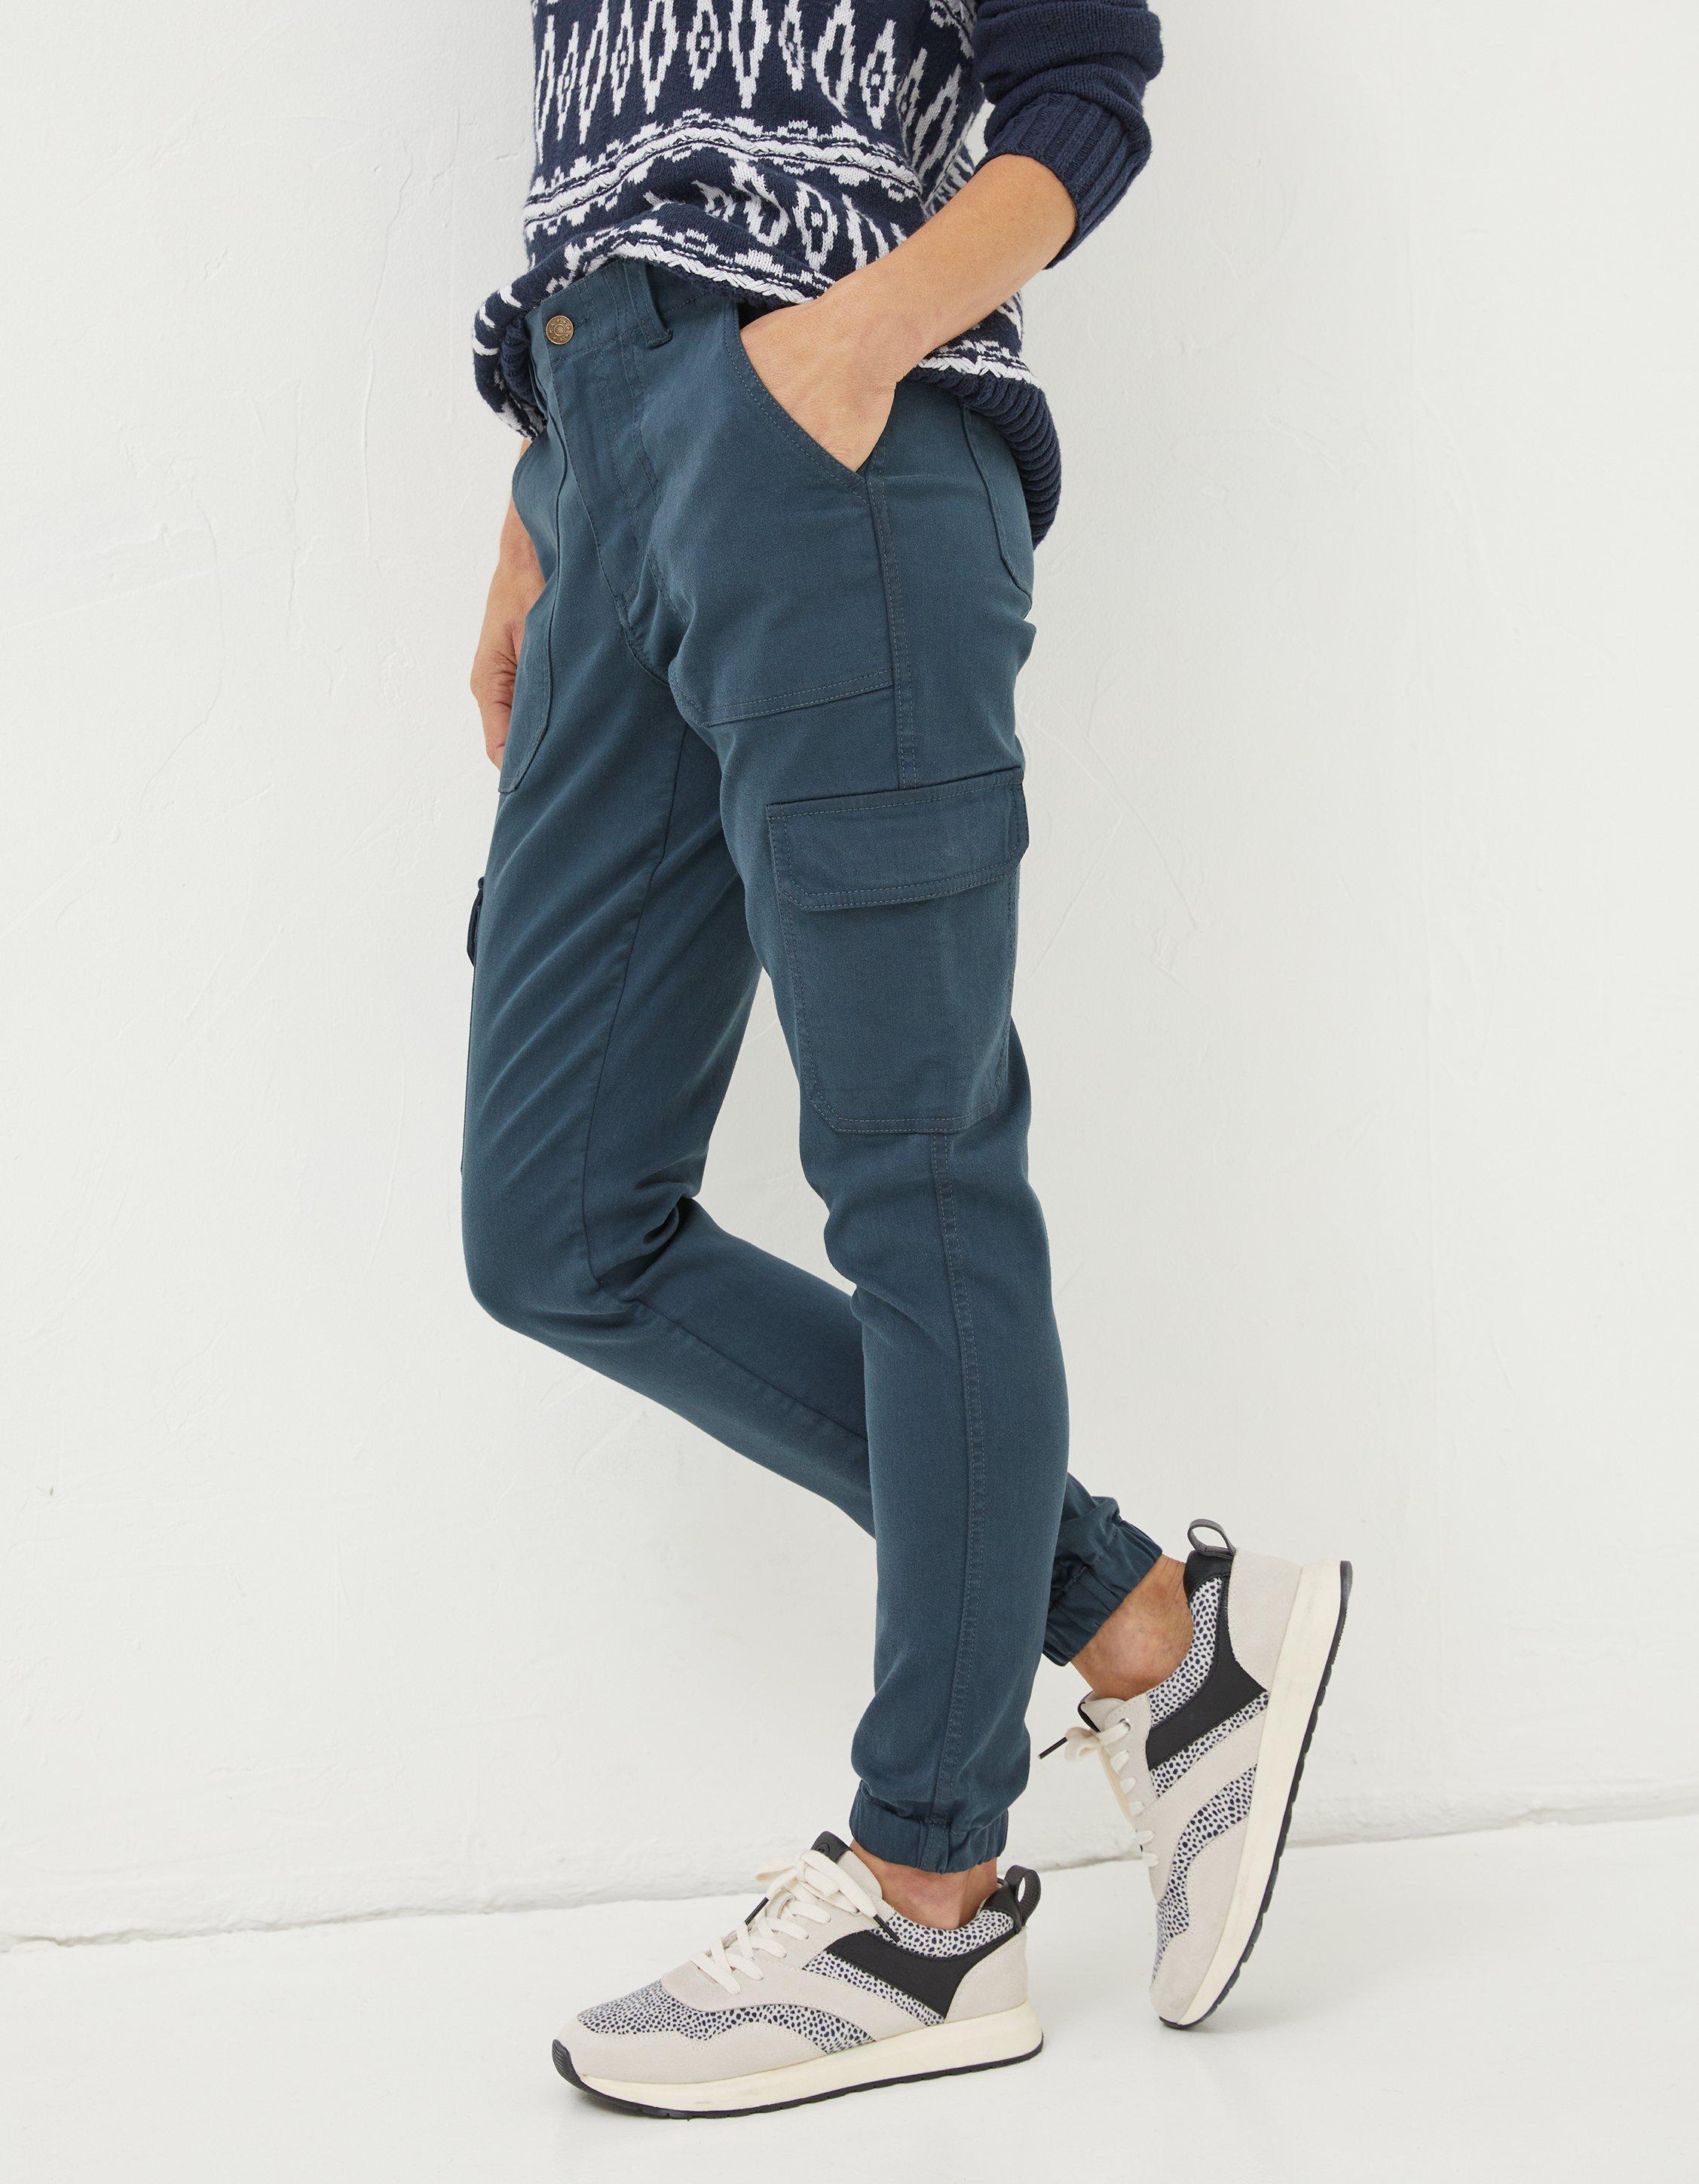 Women's Cargo Pants Recommendations- I'm on the search for good-quality cargo  pants (not the thin ones) with lots of pockets. I can only fit in women's  sizing (waist 24 inch) and would